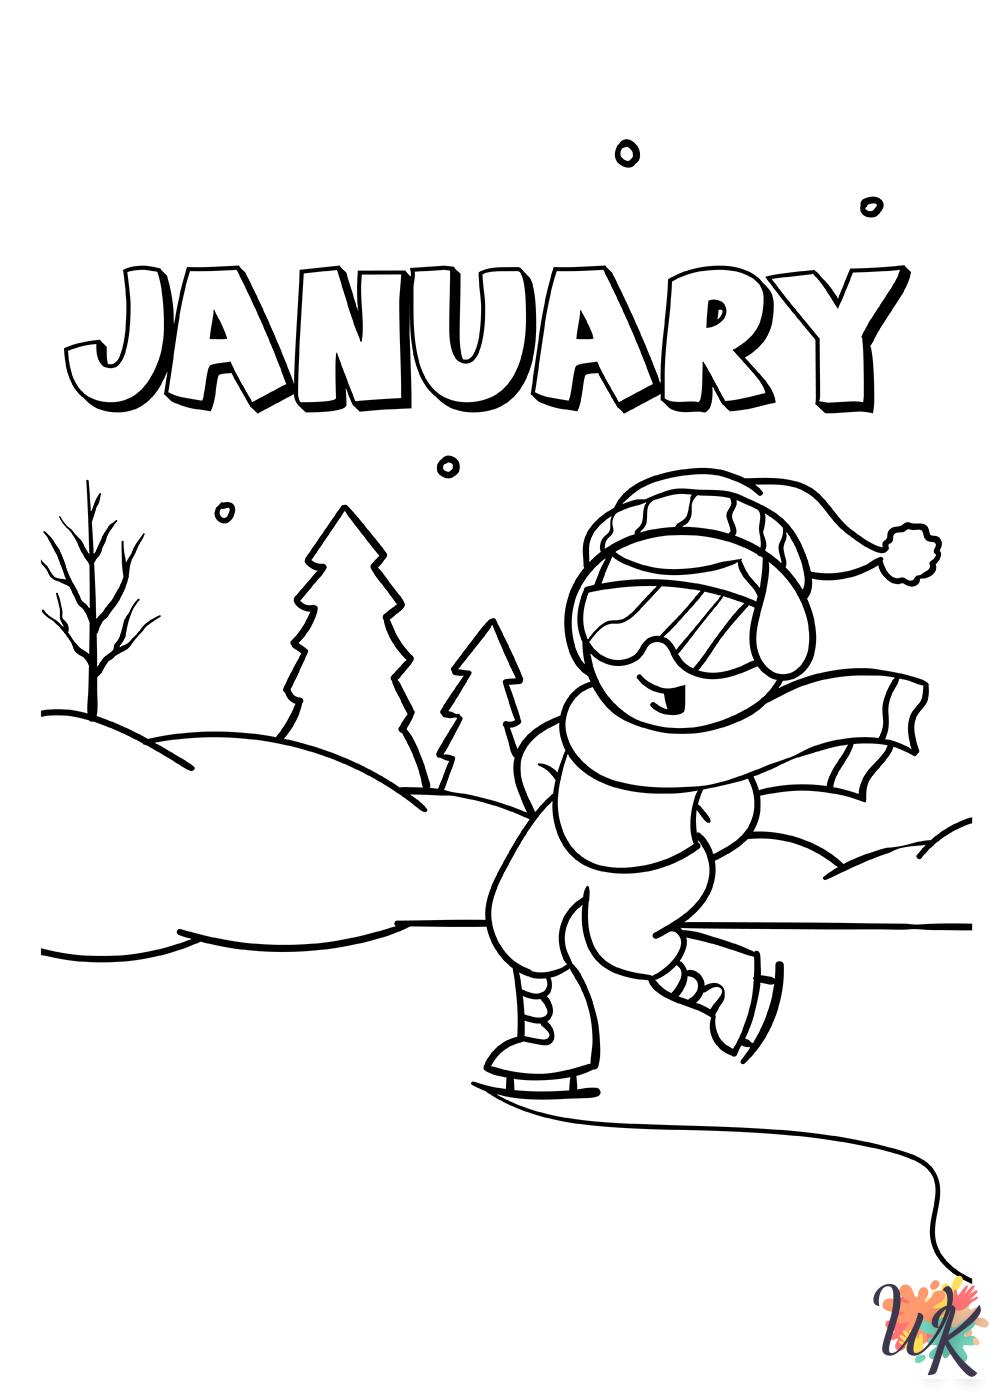 January coloring pages to print